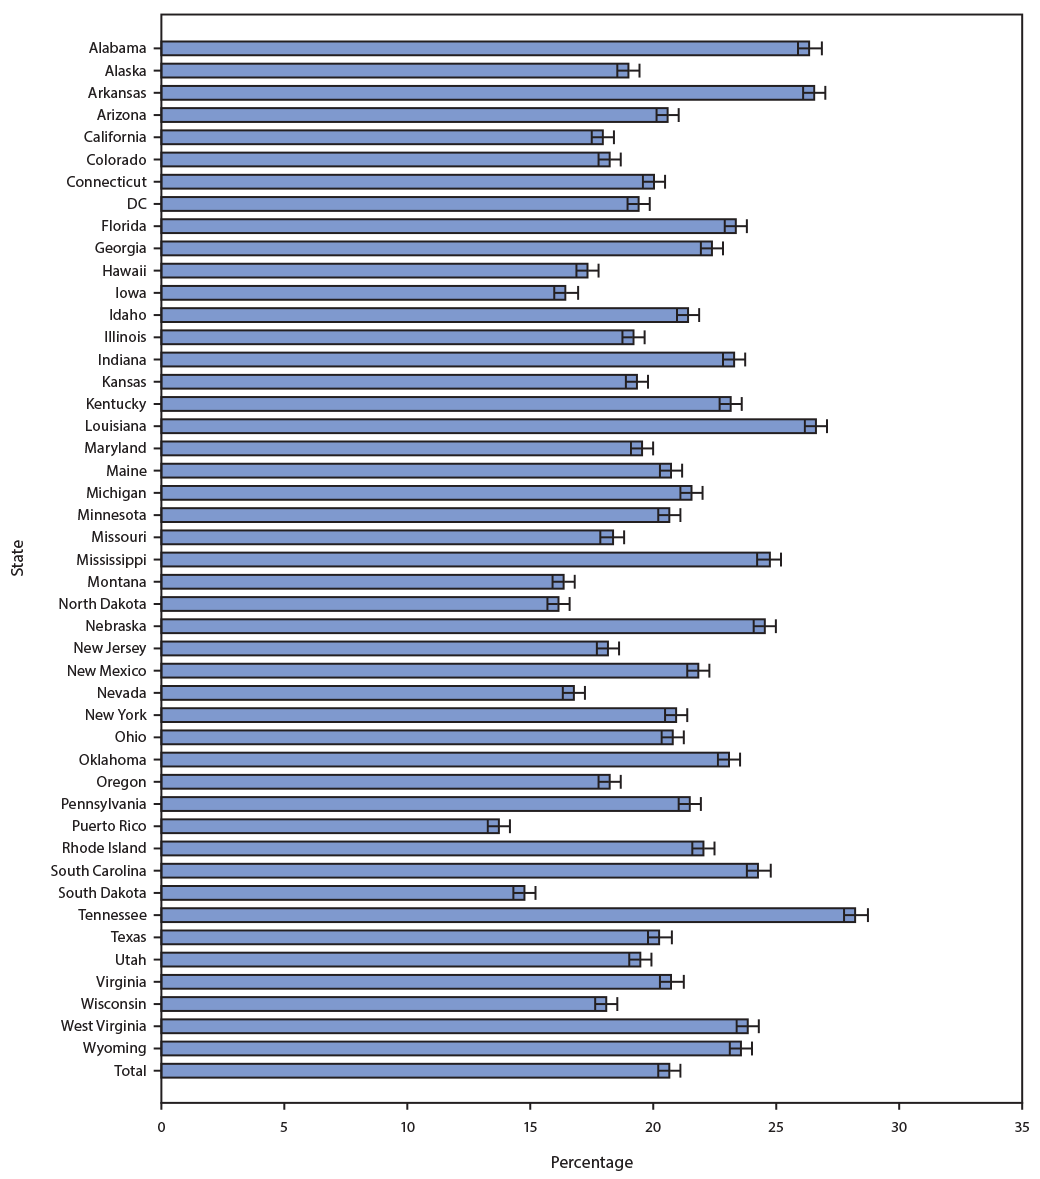 The figure is a bar graph showing the percentage of respondents self-reporting as informal, unpaid caregivers in the United States during 2015–2017, by state, based on data from the Behavioral Risk Factor Surveillance System.